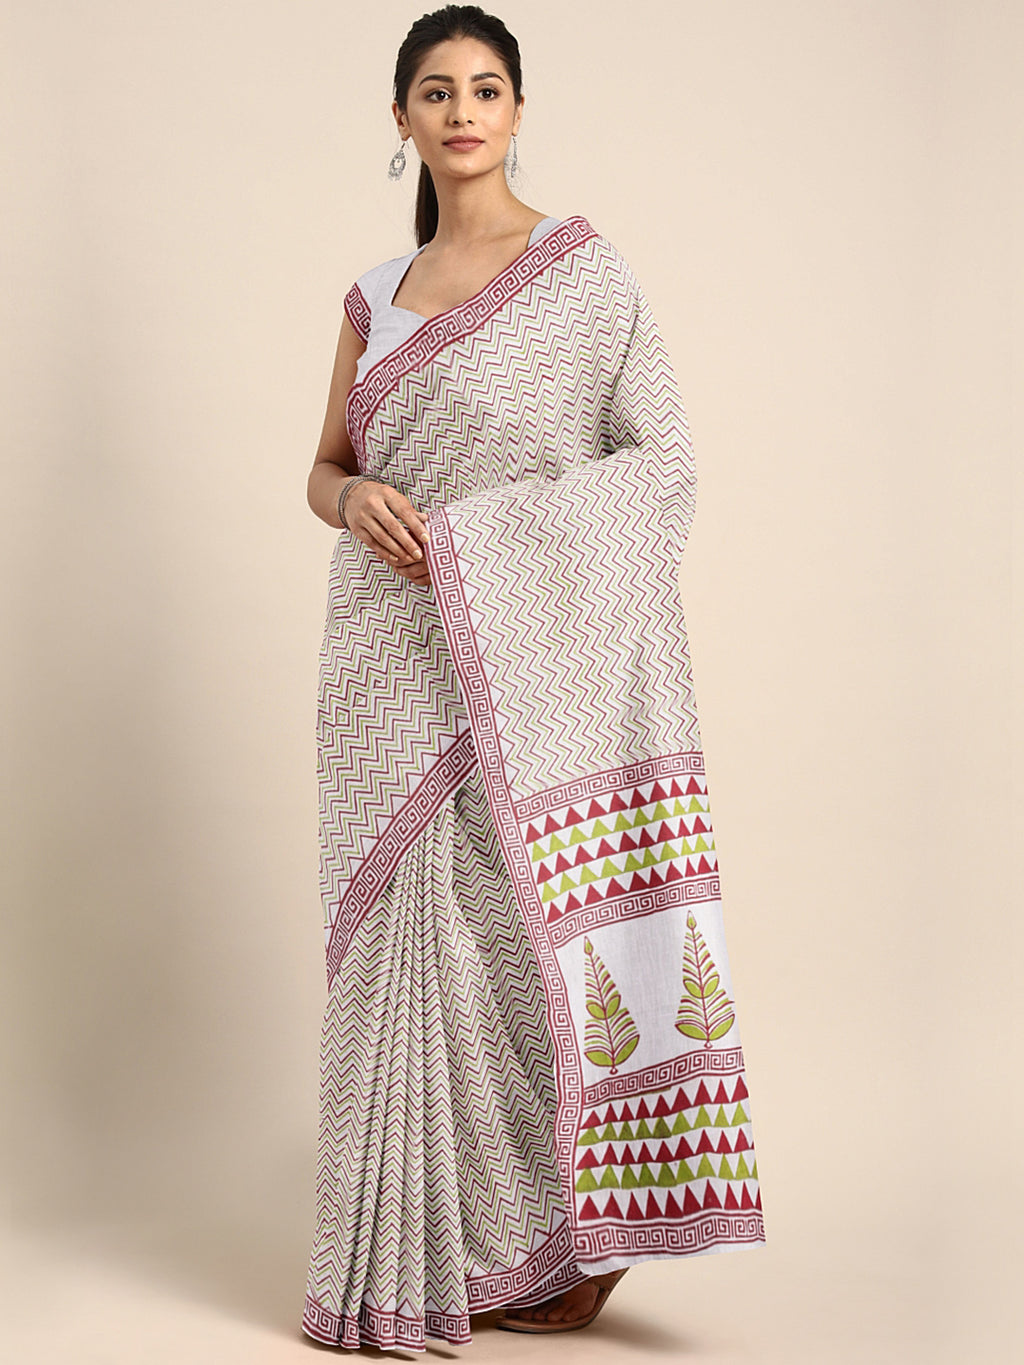 Off-White & Green Hand Block Print Handcrafted Cotton Saree-Saree-Kalakari India-BAPASA0083-Cotton, Dabu, Geographical Indication, Hand Blocks, Hand Crafted, Heritage Prints, Sarees, Sustainable Fabrics-[Linen,Ethnic,wear,Fashionista,Handloom,Handicraft,Indigo,blockprint,block,print,Cotton,Chanderi,Blue, latest,classy,party,bollywood,trendy,summer,style,traditional,formal,elegant,unique,style,hand,block,print, dabu,booti,gift,present,glamorous,affordable,collectible,Sari,Saree,printed, holi, Diw